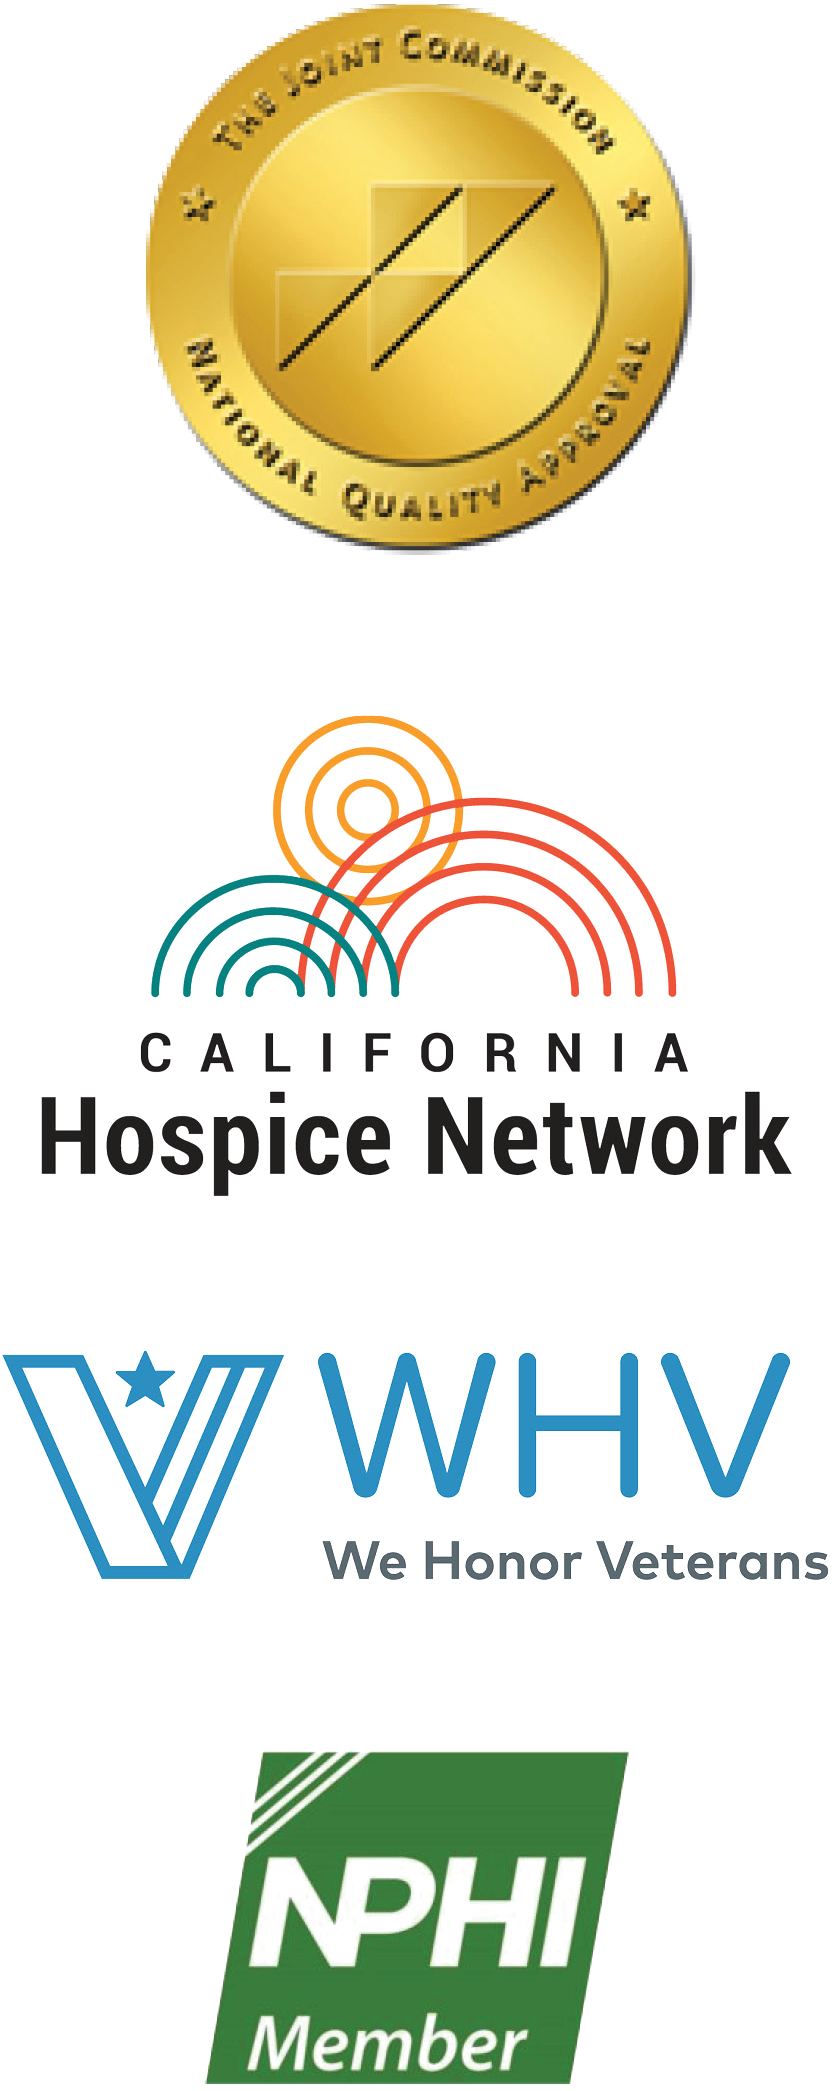 Joint Commission Accredited, Founding member, California Hospice Network